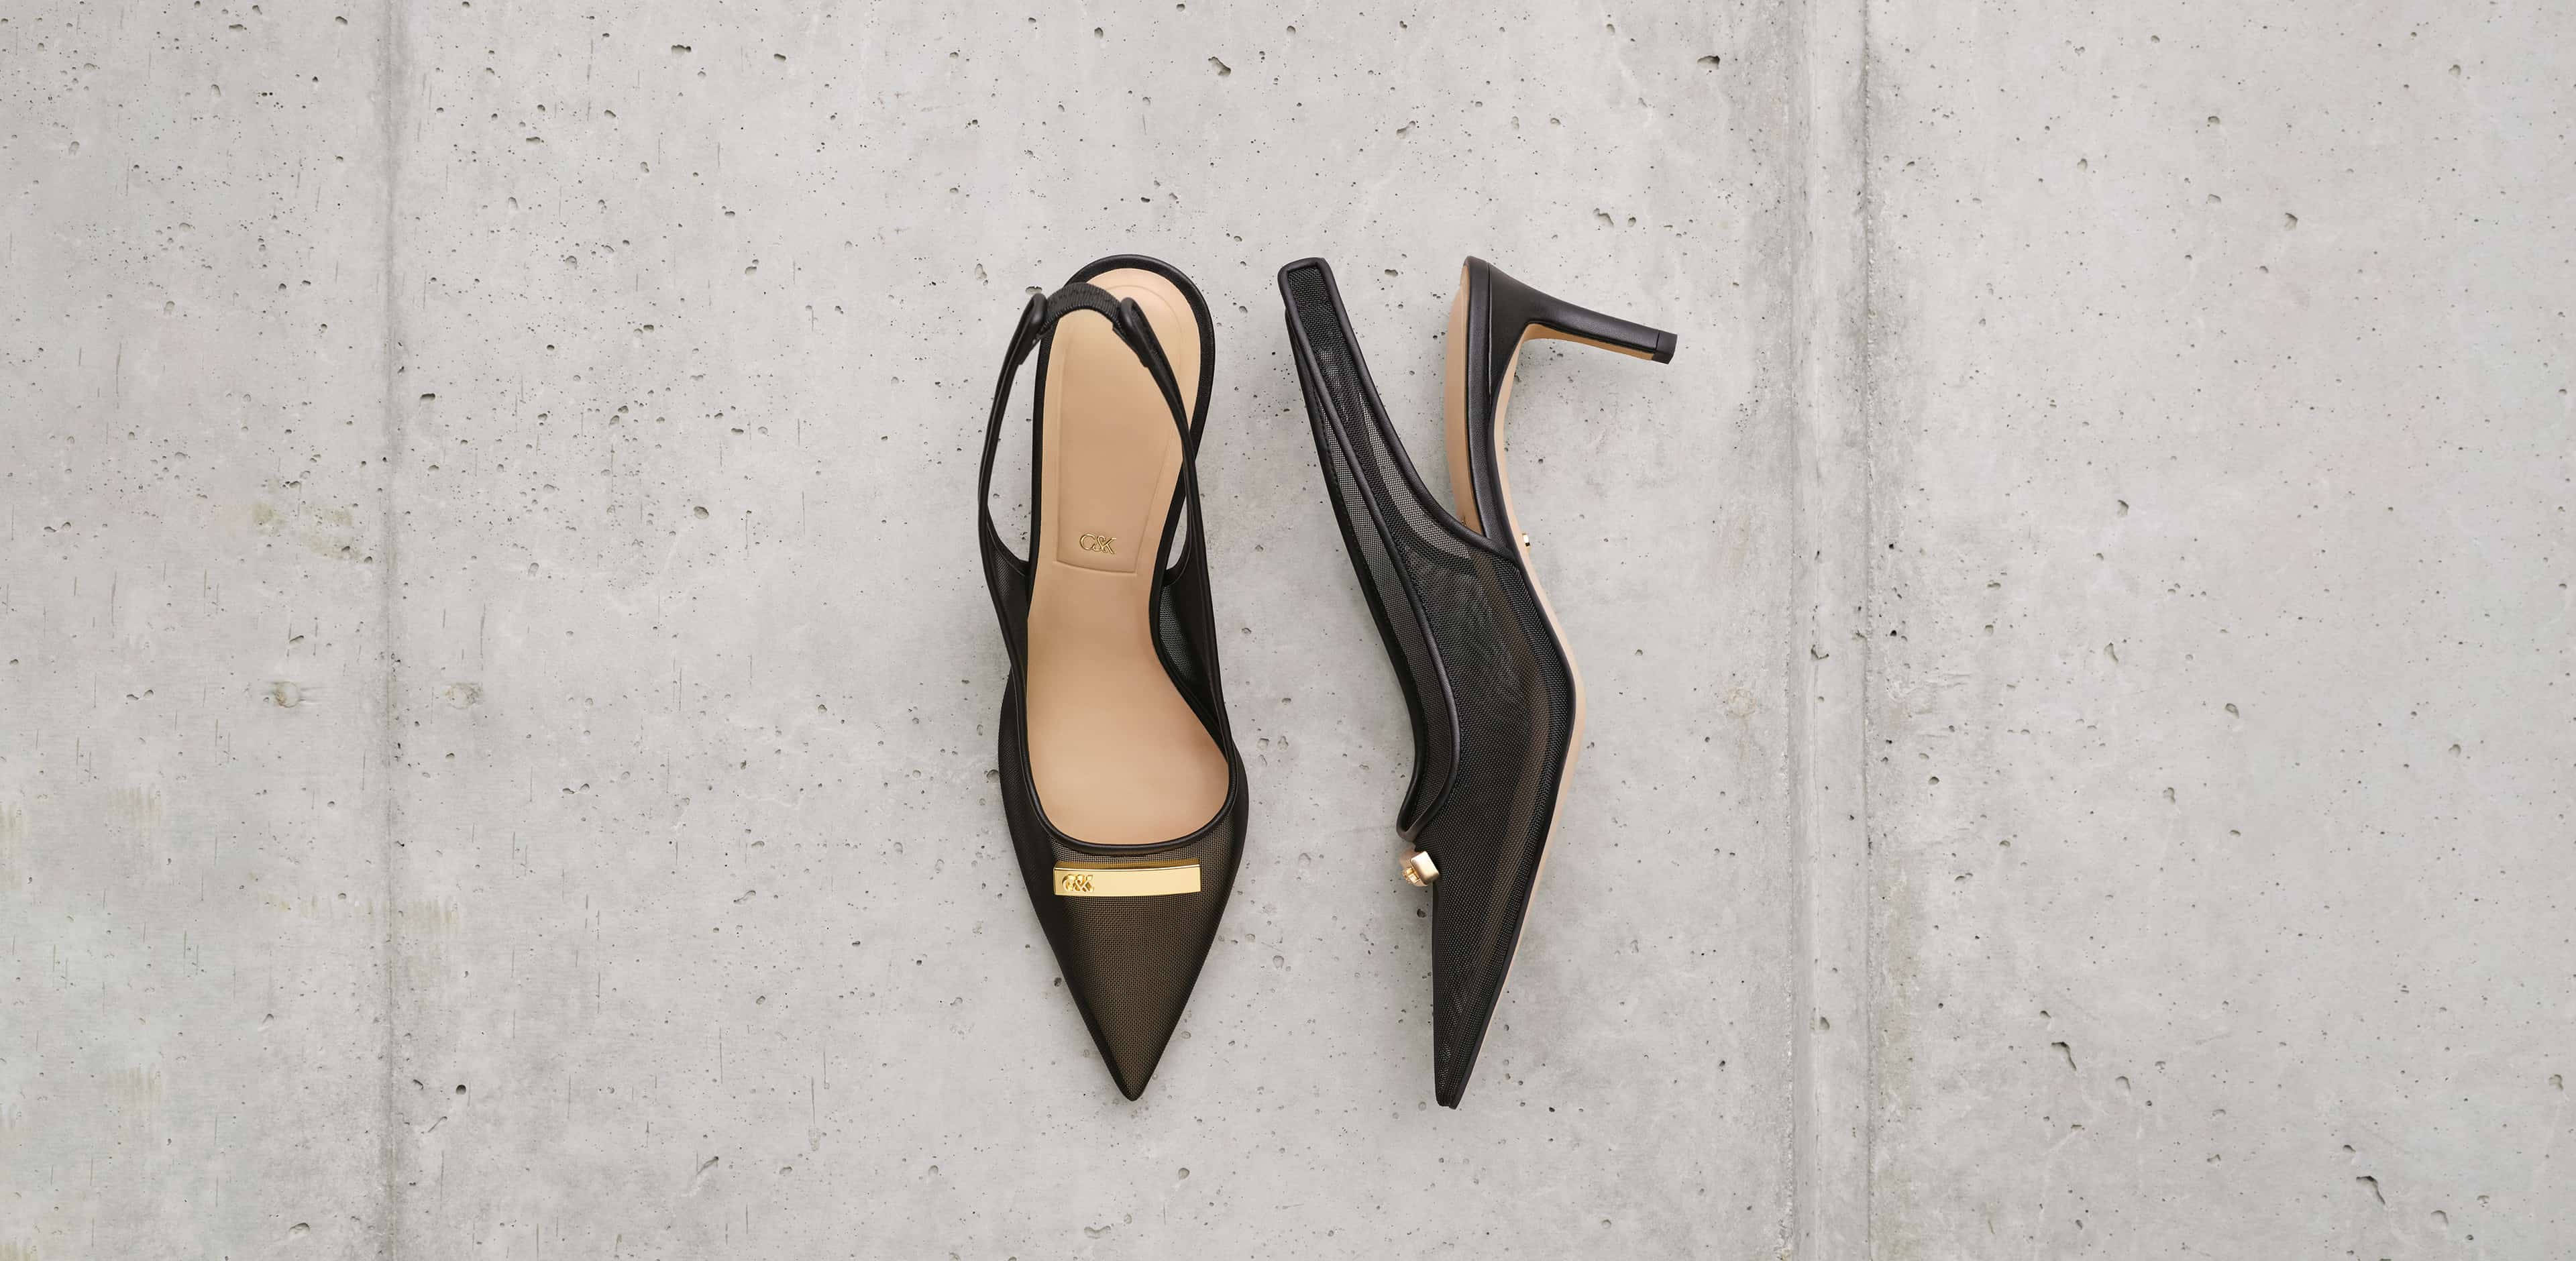 Women’s Mesh Pointed-Toe Slingback Pumps in black - CHARLES & KEITH